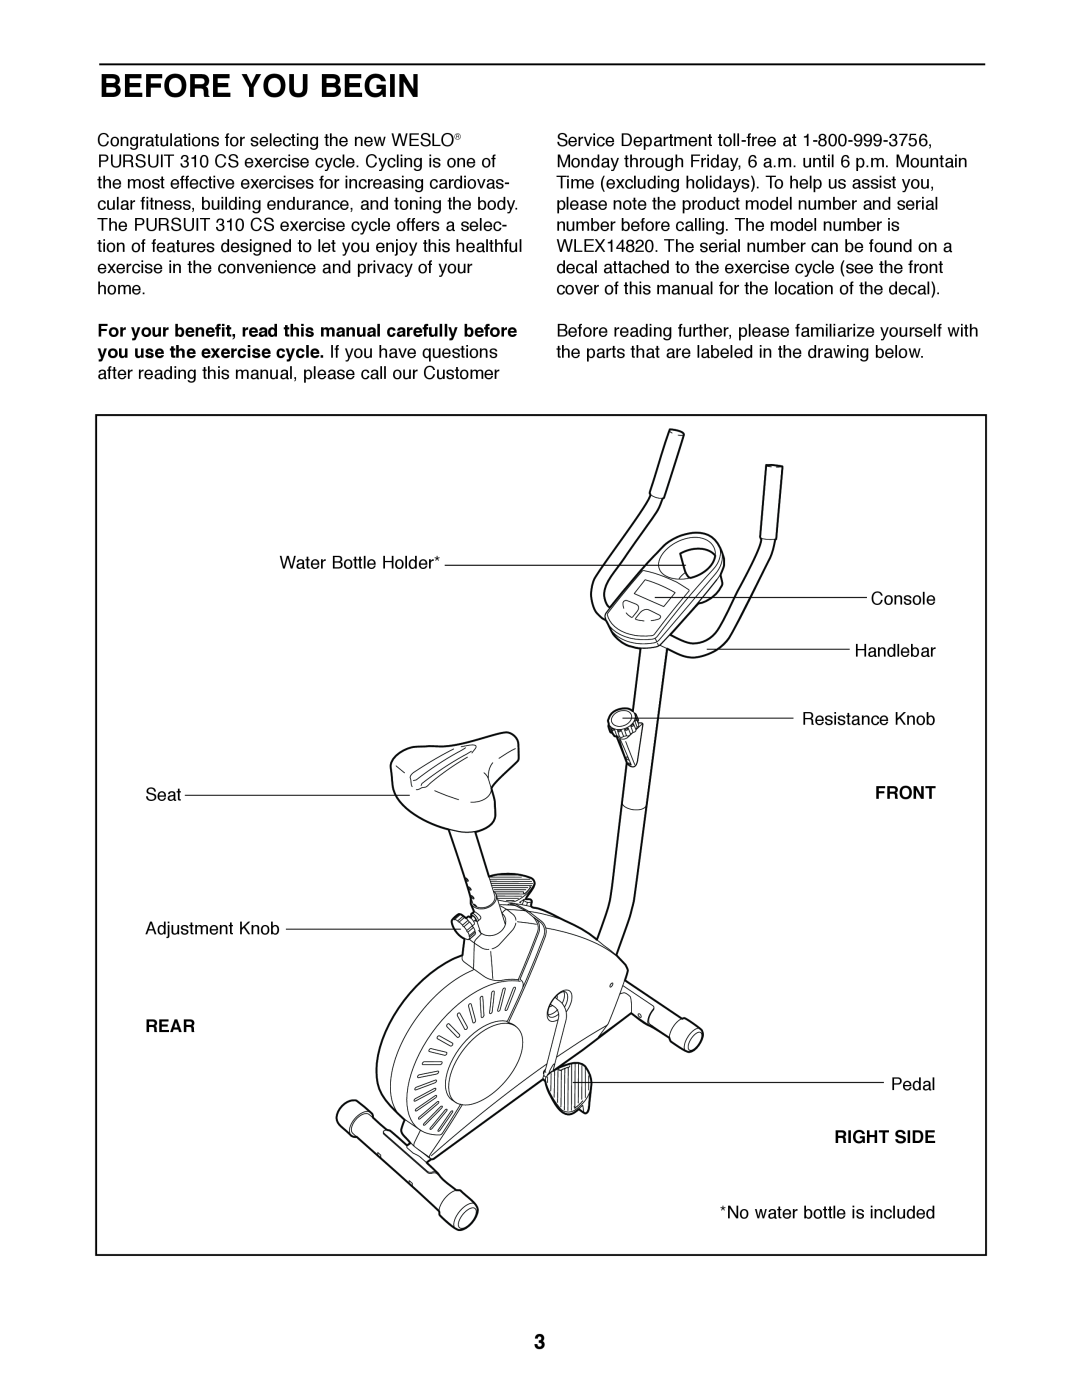 Weslo WLEX14820 user manual Before You Begin, Front, Rear, Right Side 